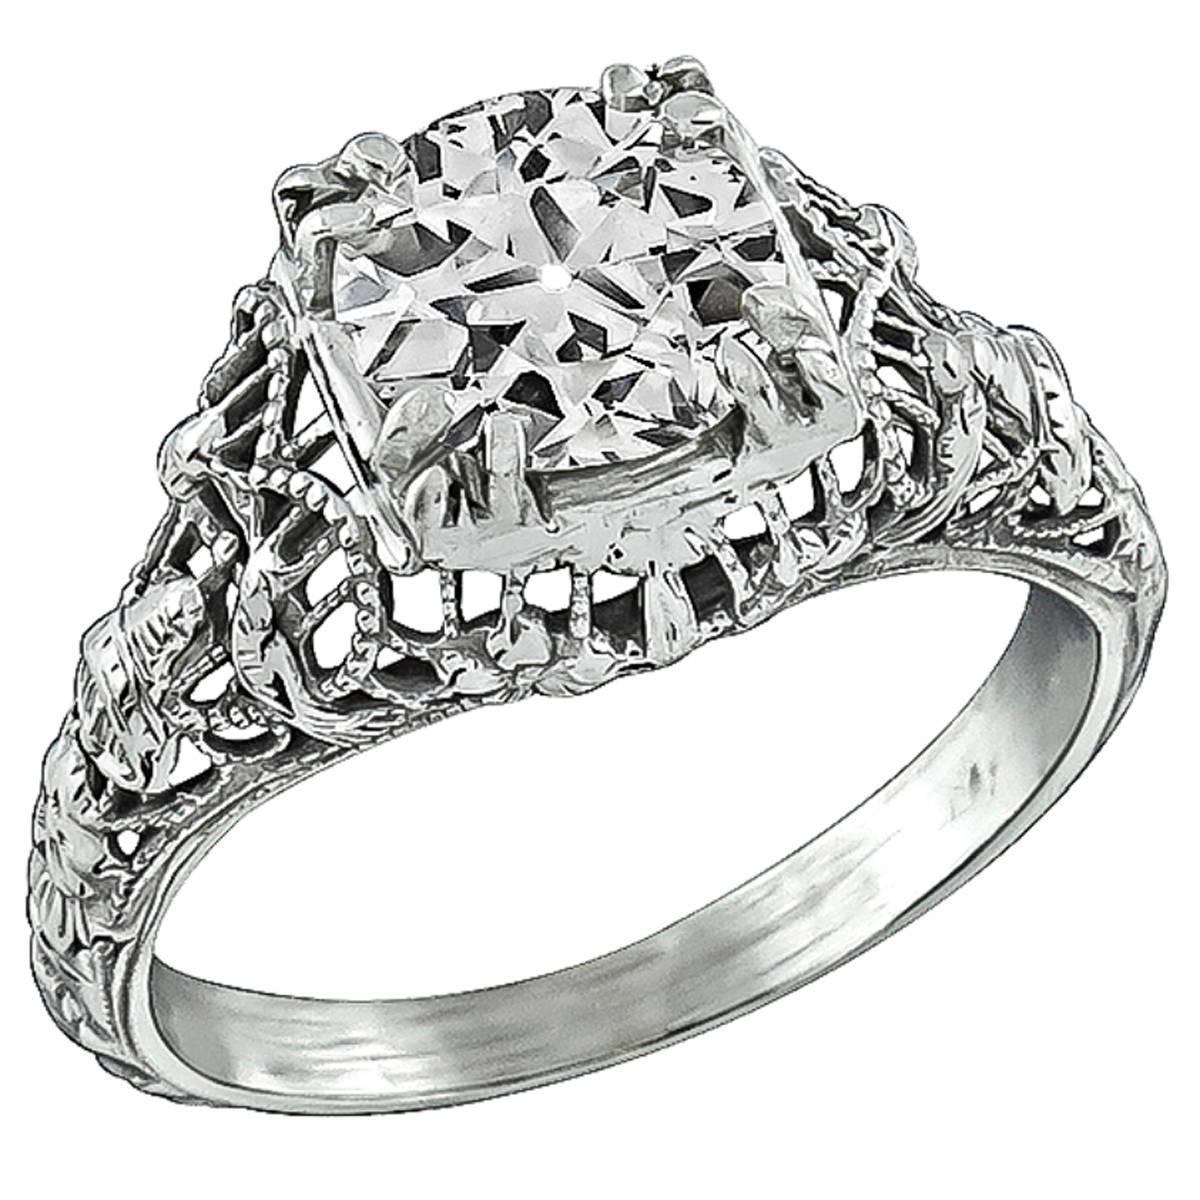 Antique 0.95ct. White Gold Engagement Ring